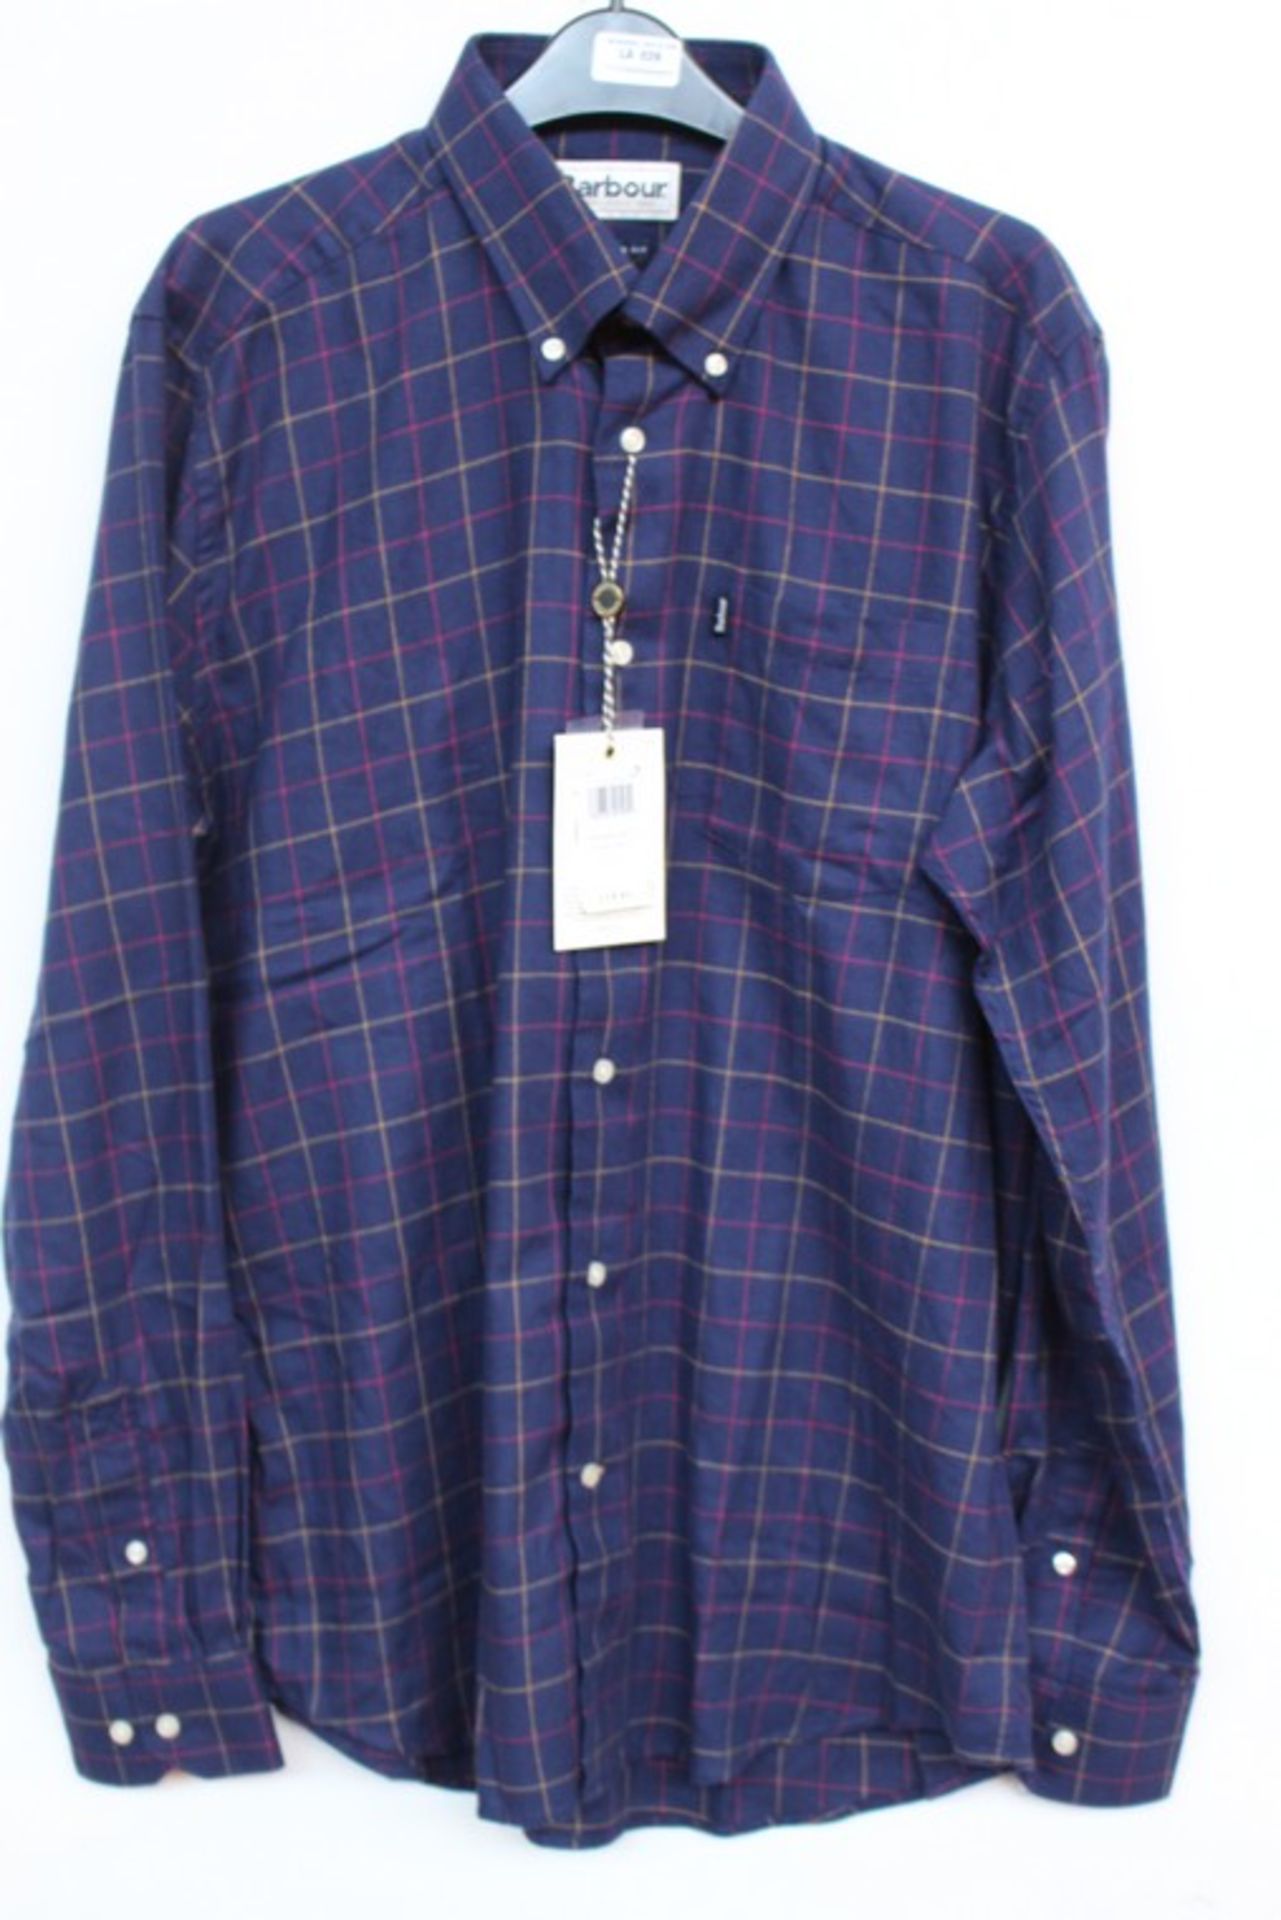 1 x BARBOUR SHIRT IN BLUE RRP £60 (16.10.17) *PLEASE NOTE THAT THE BID PRICE IS MULTIPLIED BY THE